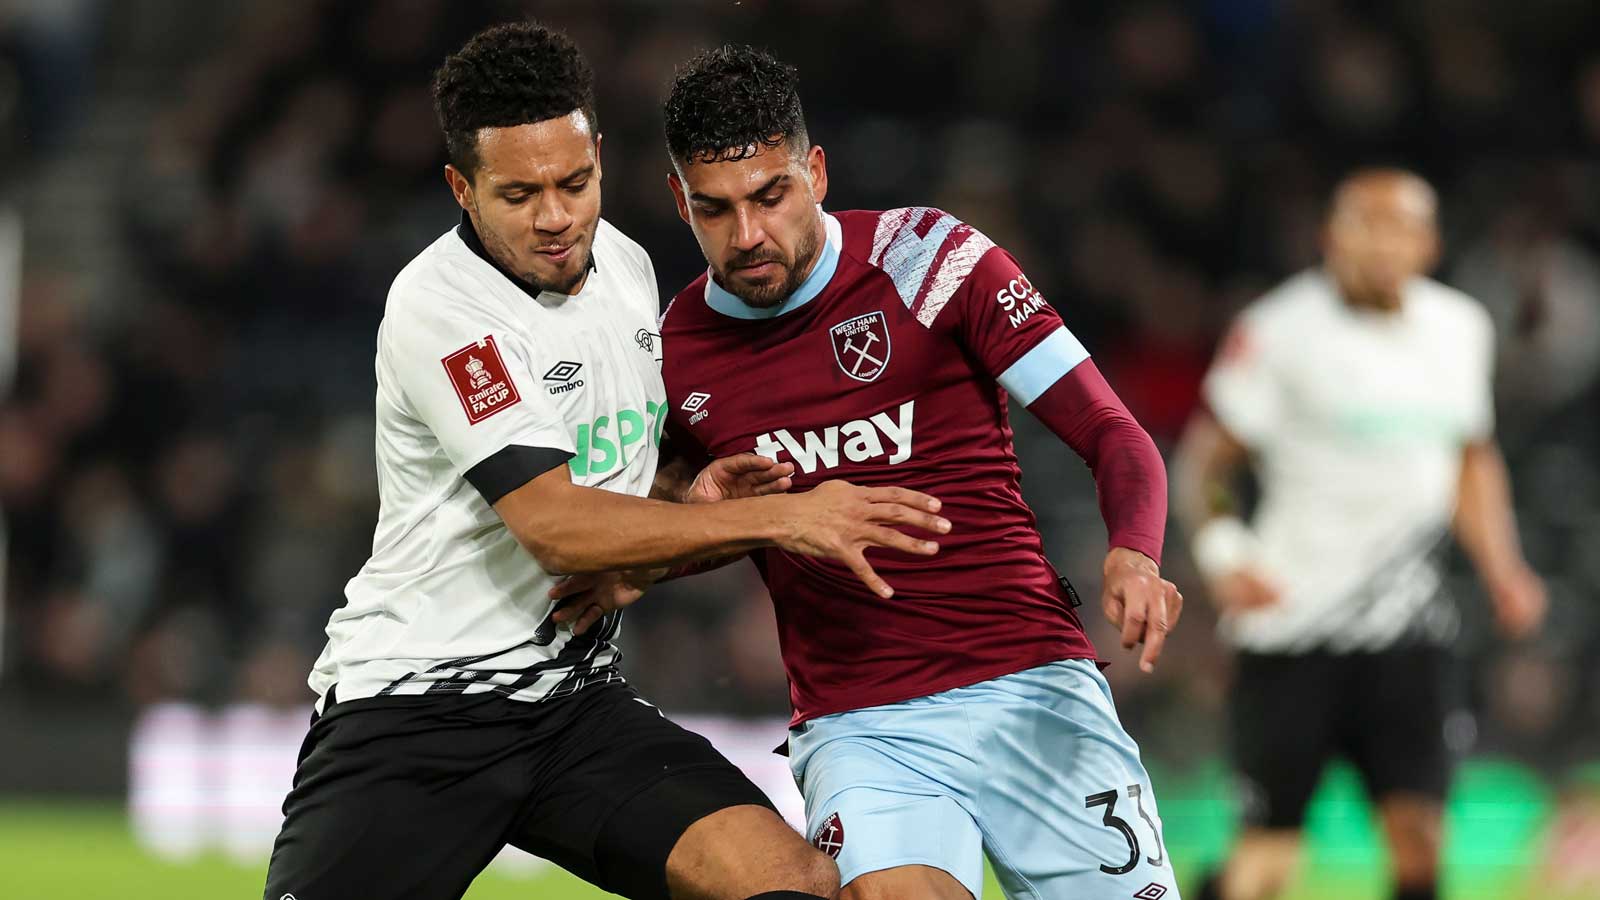 Emerson battles for possession at Derby